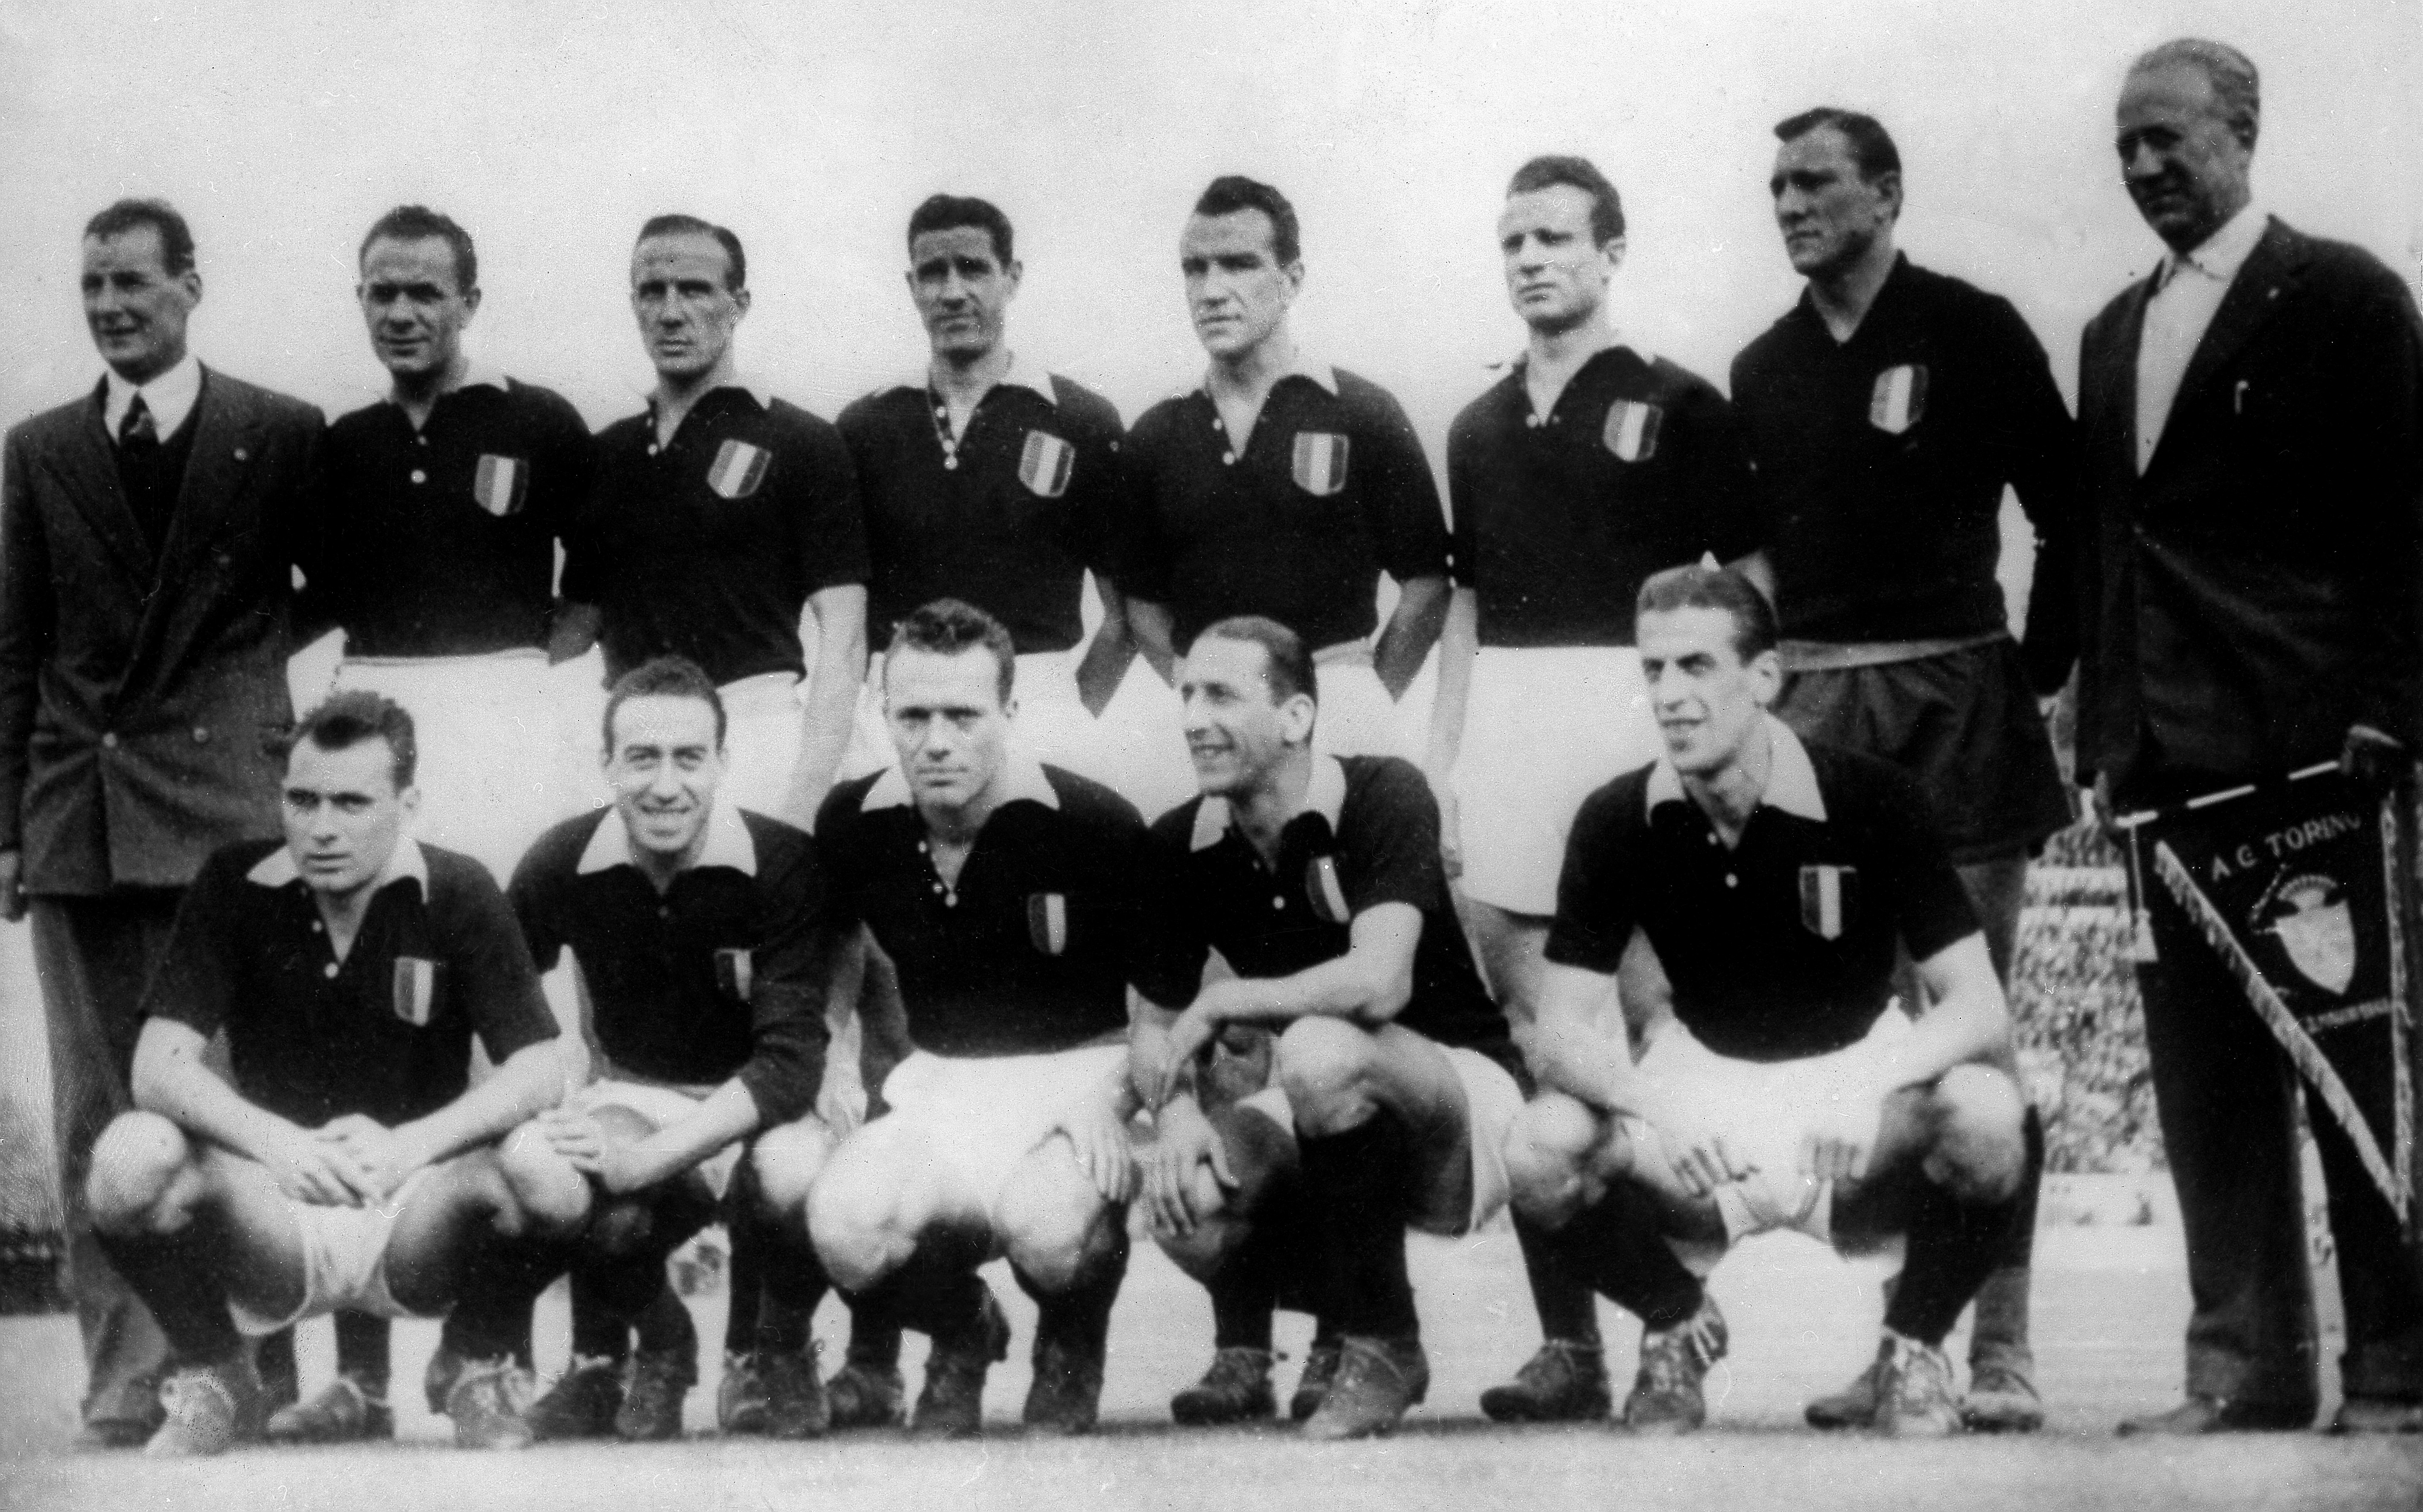 Superga air disaster, On May 4, 1949, a Fiat G-212 plane carrying almost the entire Torino A.C. football squad popularly known as “Il Grande Torino” crashed into the hill of Superga near Turin killing all 31 aboard including 18 players, club official